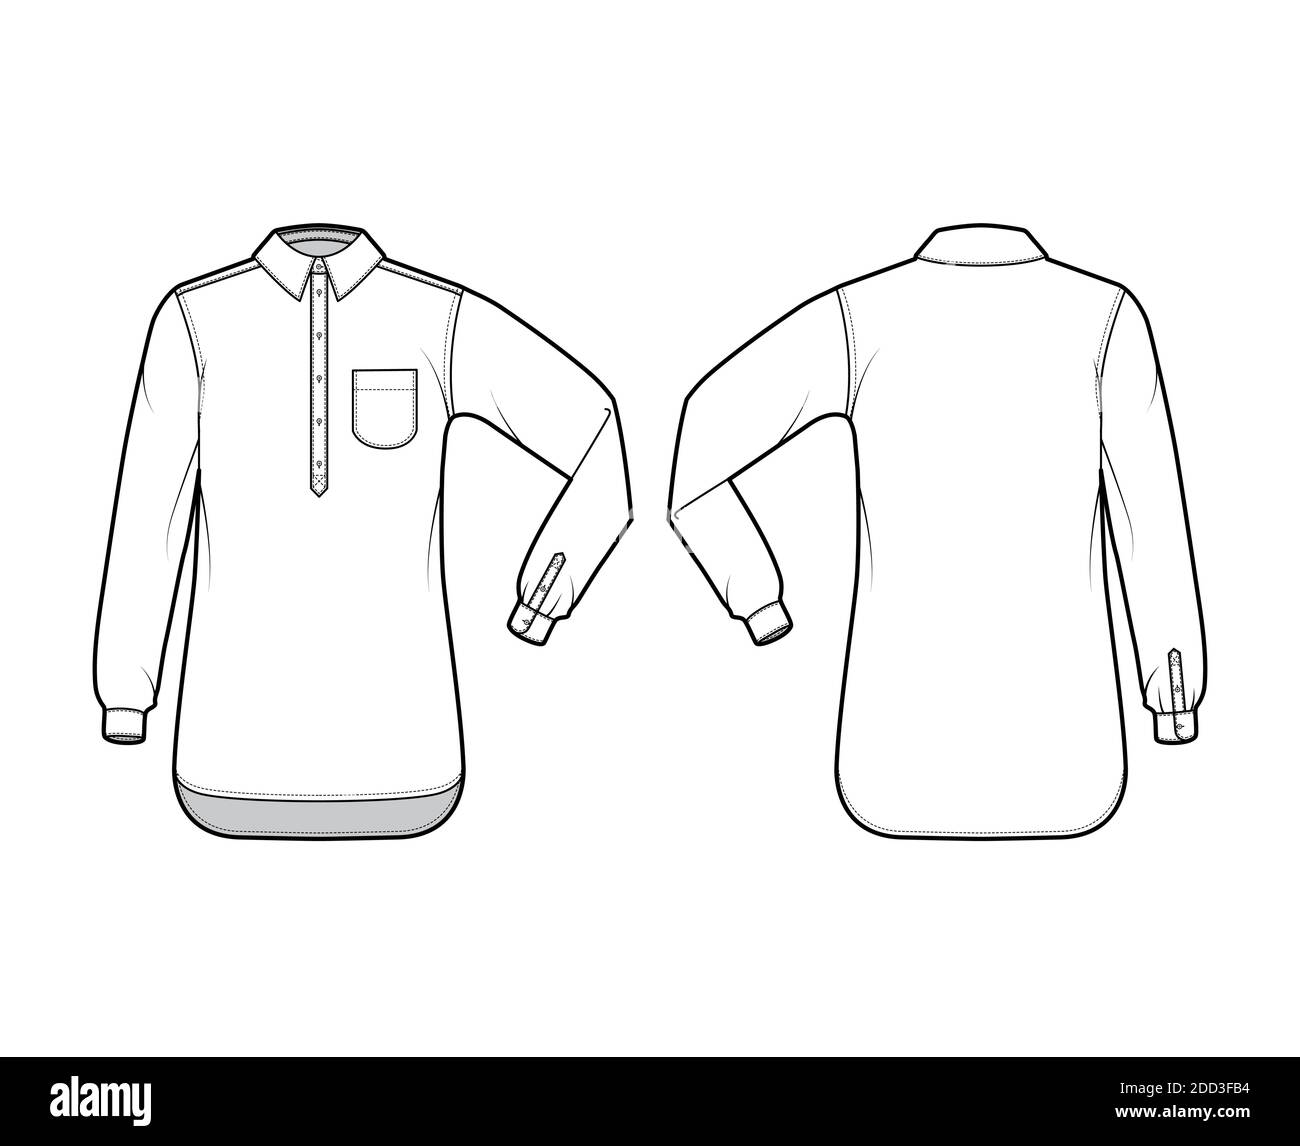 Shirt pullover technical fashion illustration with rounded pocket ...